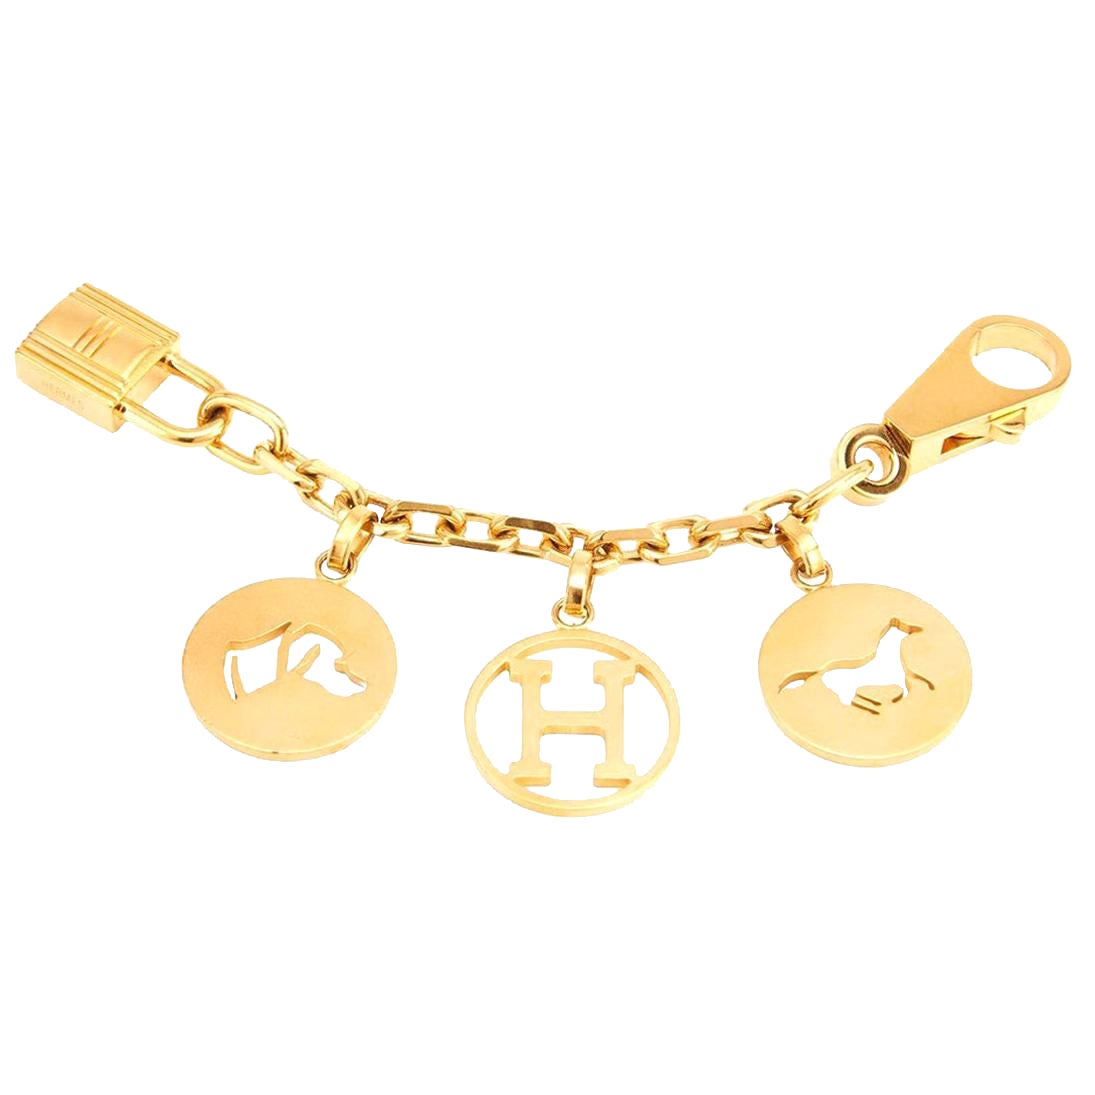 Hermes Charm Gold Breloque Horse Dog H for Birkin and Kelly Bag at